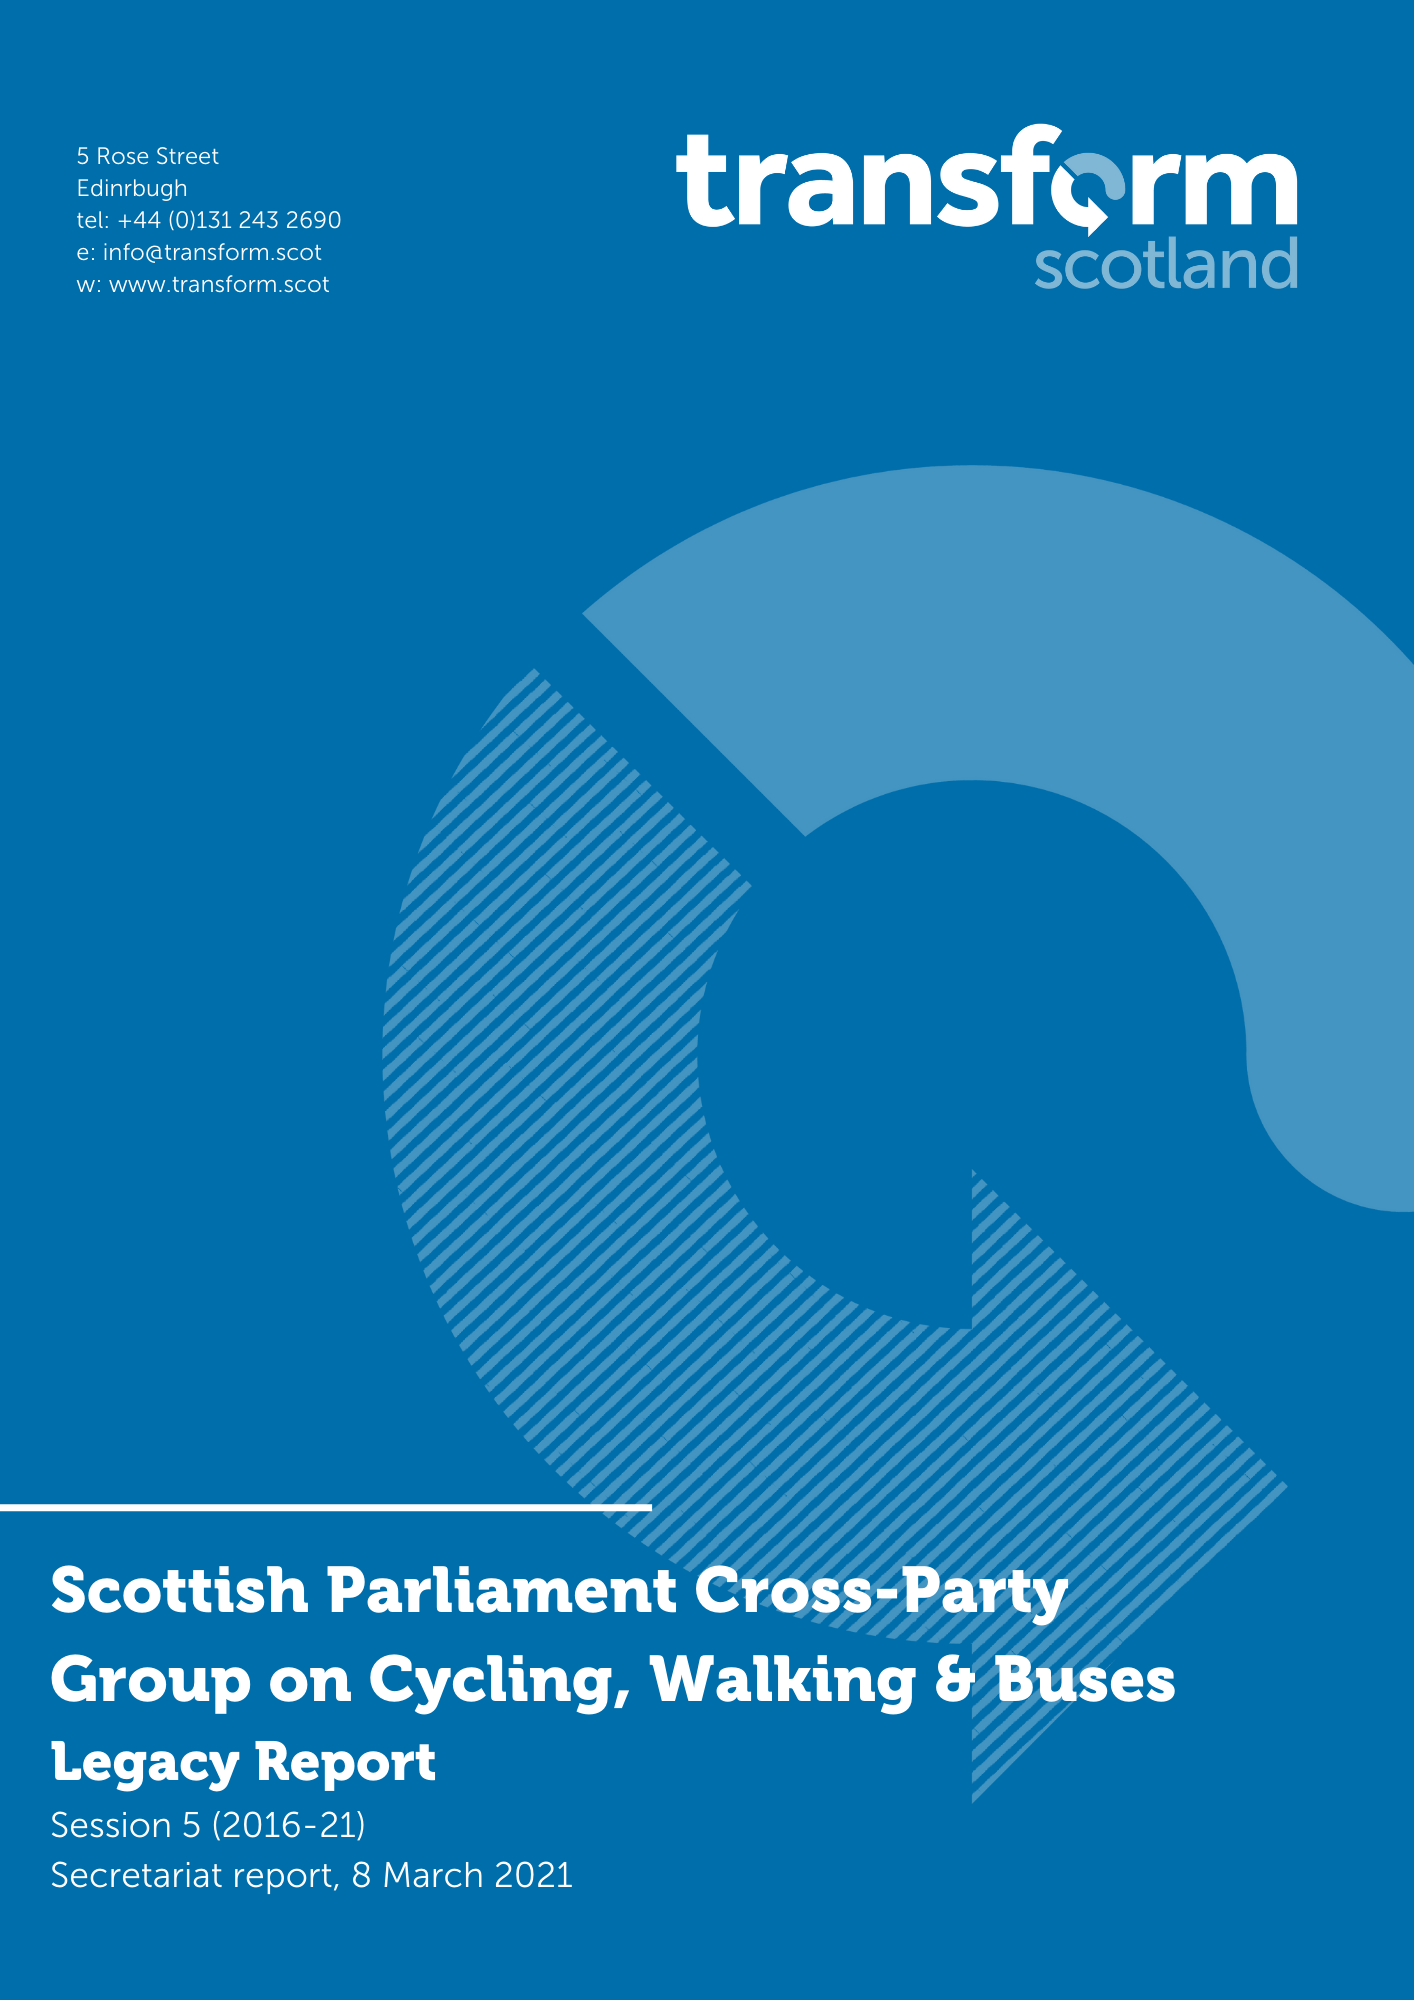 Scottish Parliament Cross-Party Group on Cycling, Walking & Buses — Legacy Report